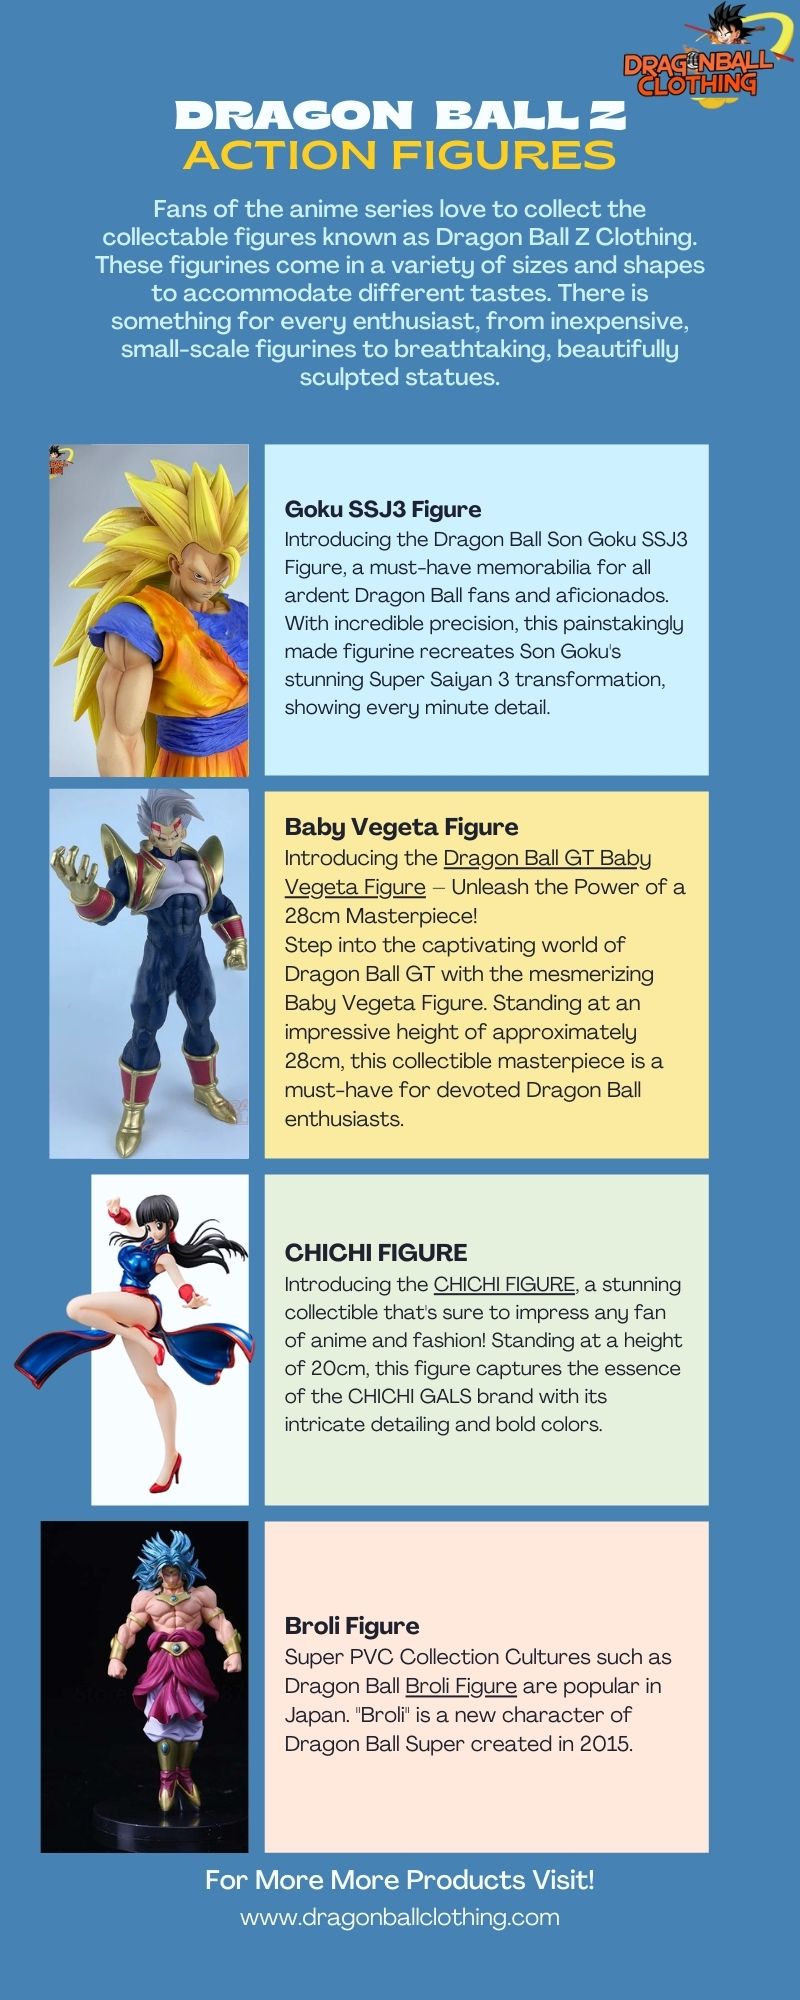 Dragon Ball Z Action Figures infographic